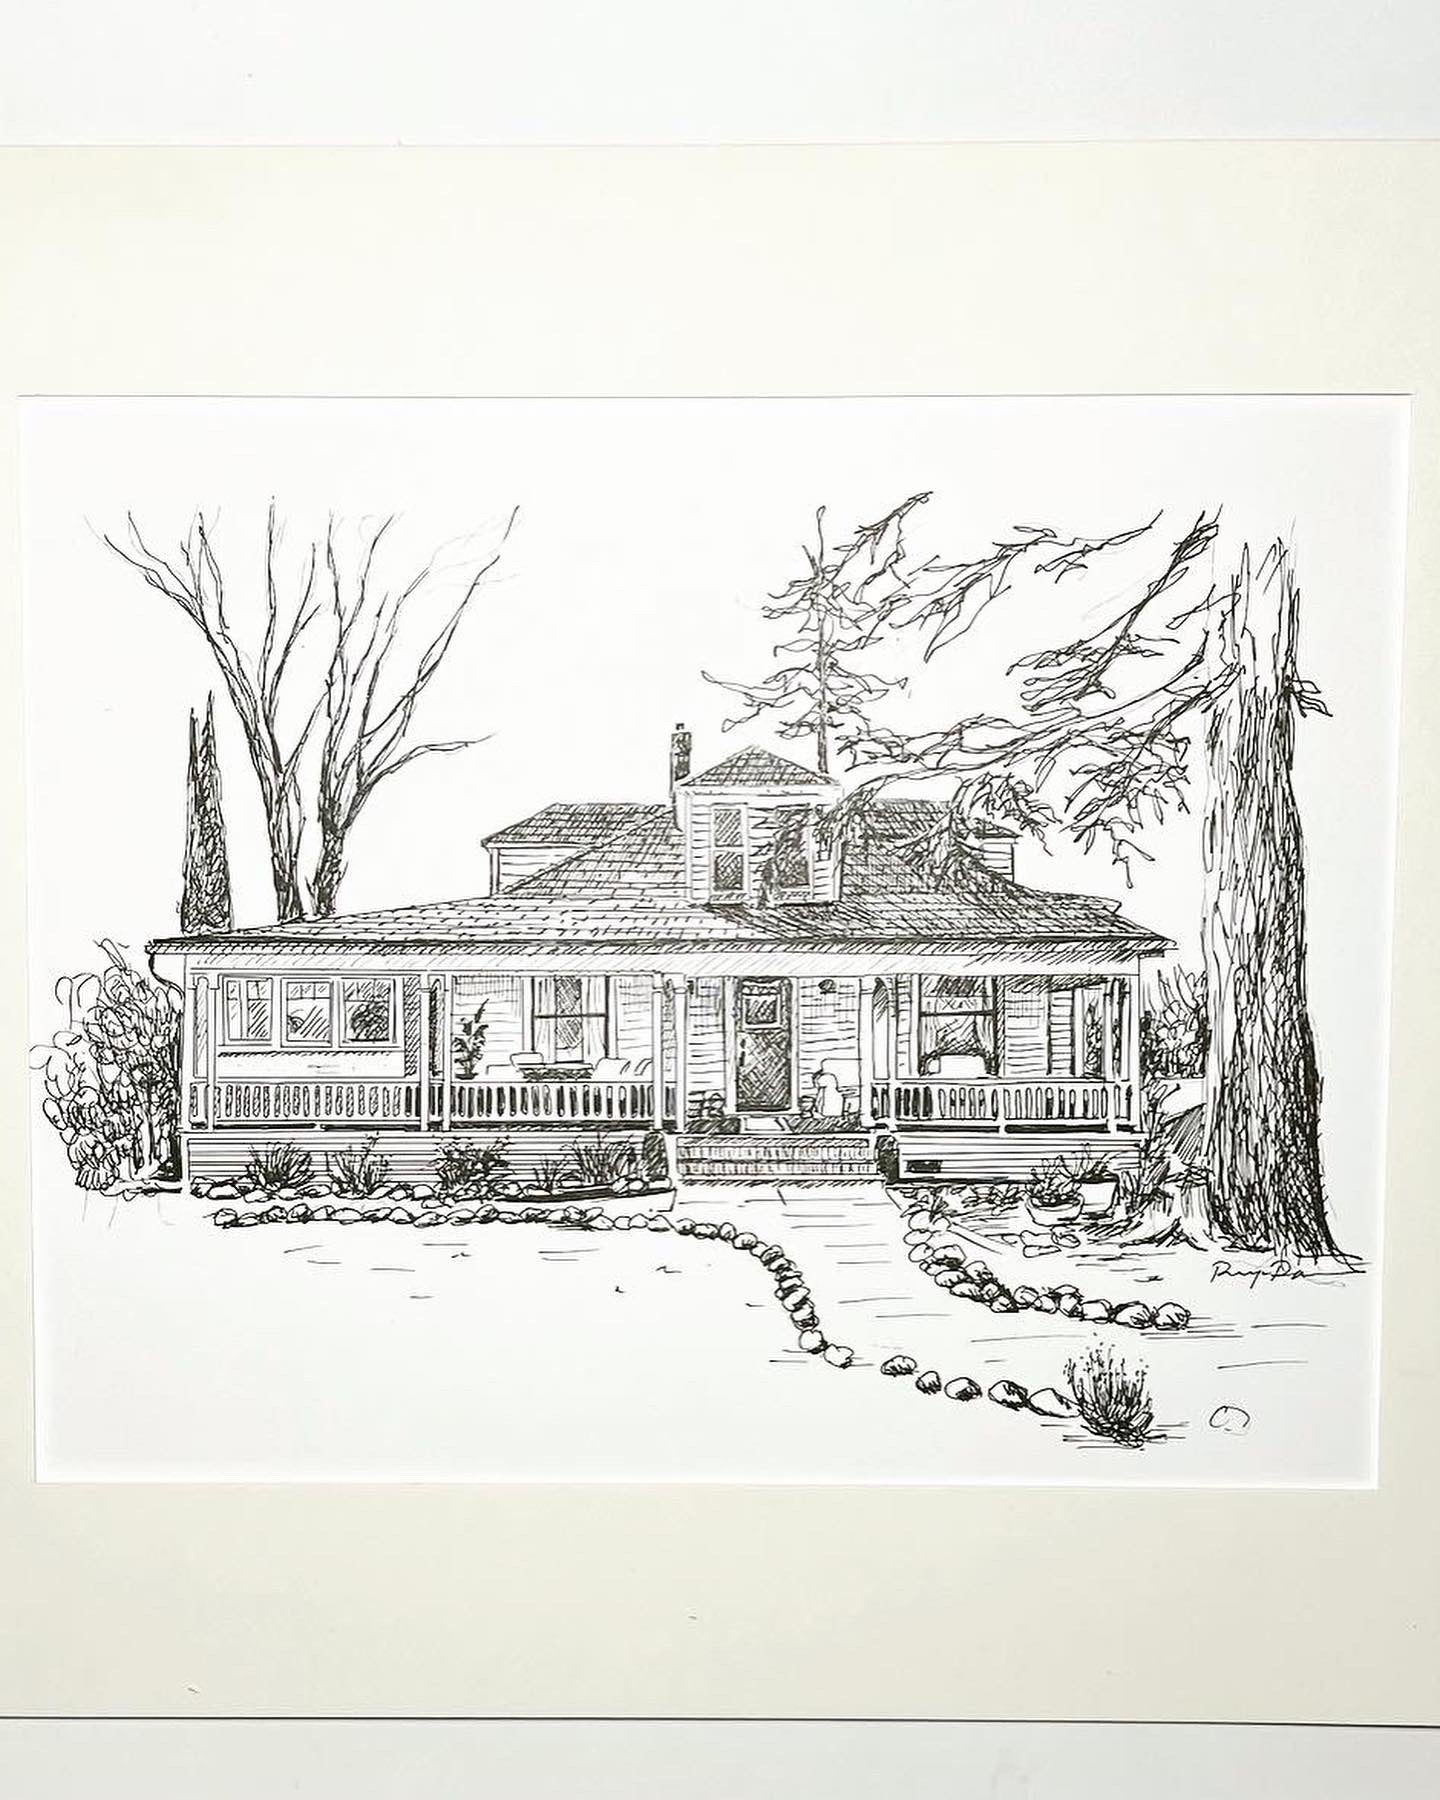 Custom Pen and Ink Home Portrait (Gifts for new homeowners, childhood homes, anniversaries, closing gift for realtors!)